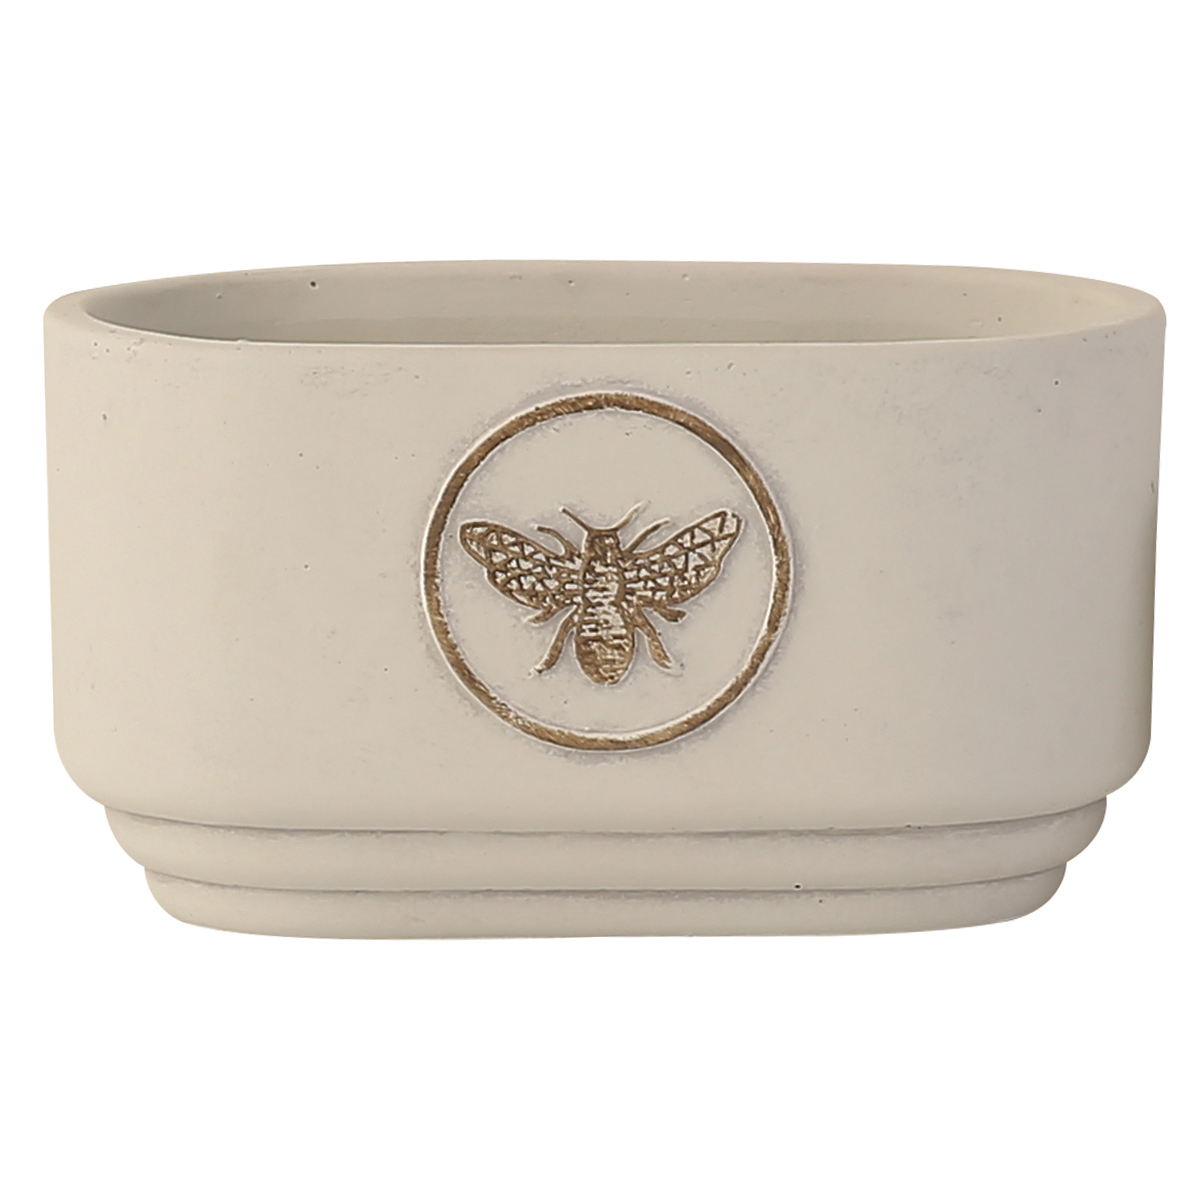 Picture of Queen Bee Trough Planter 20x11.5x11 cm